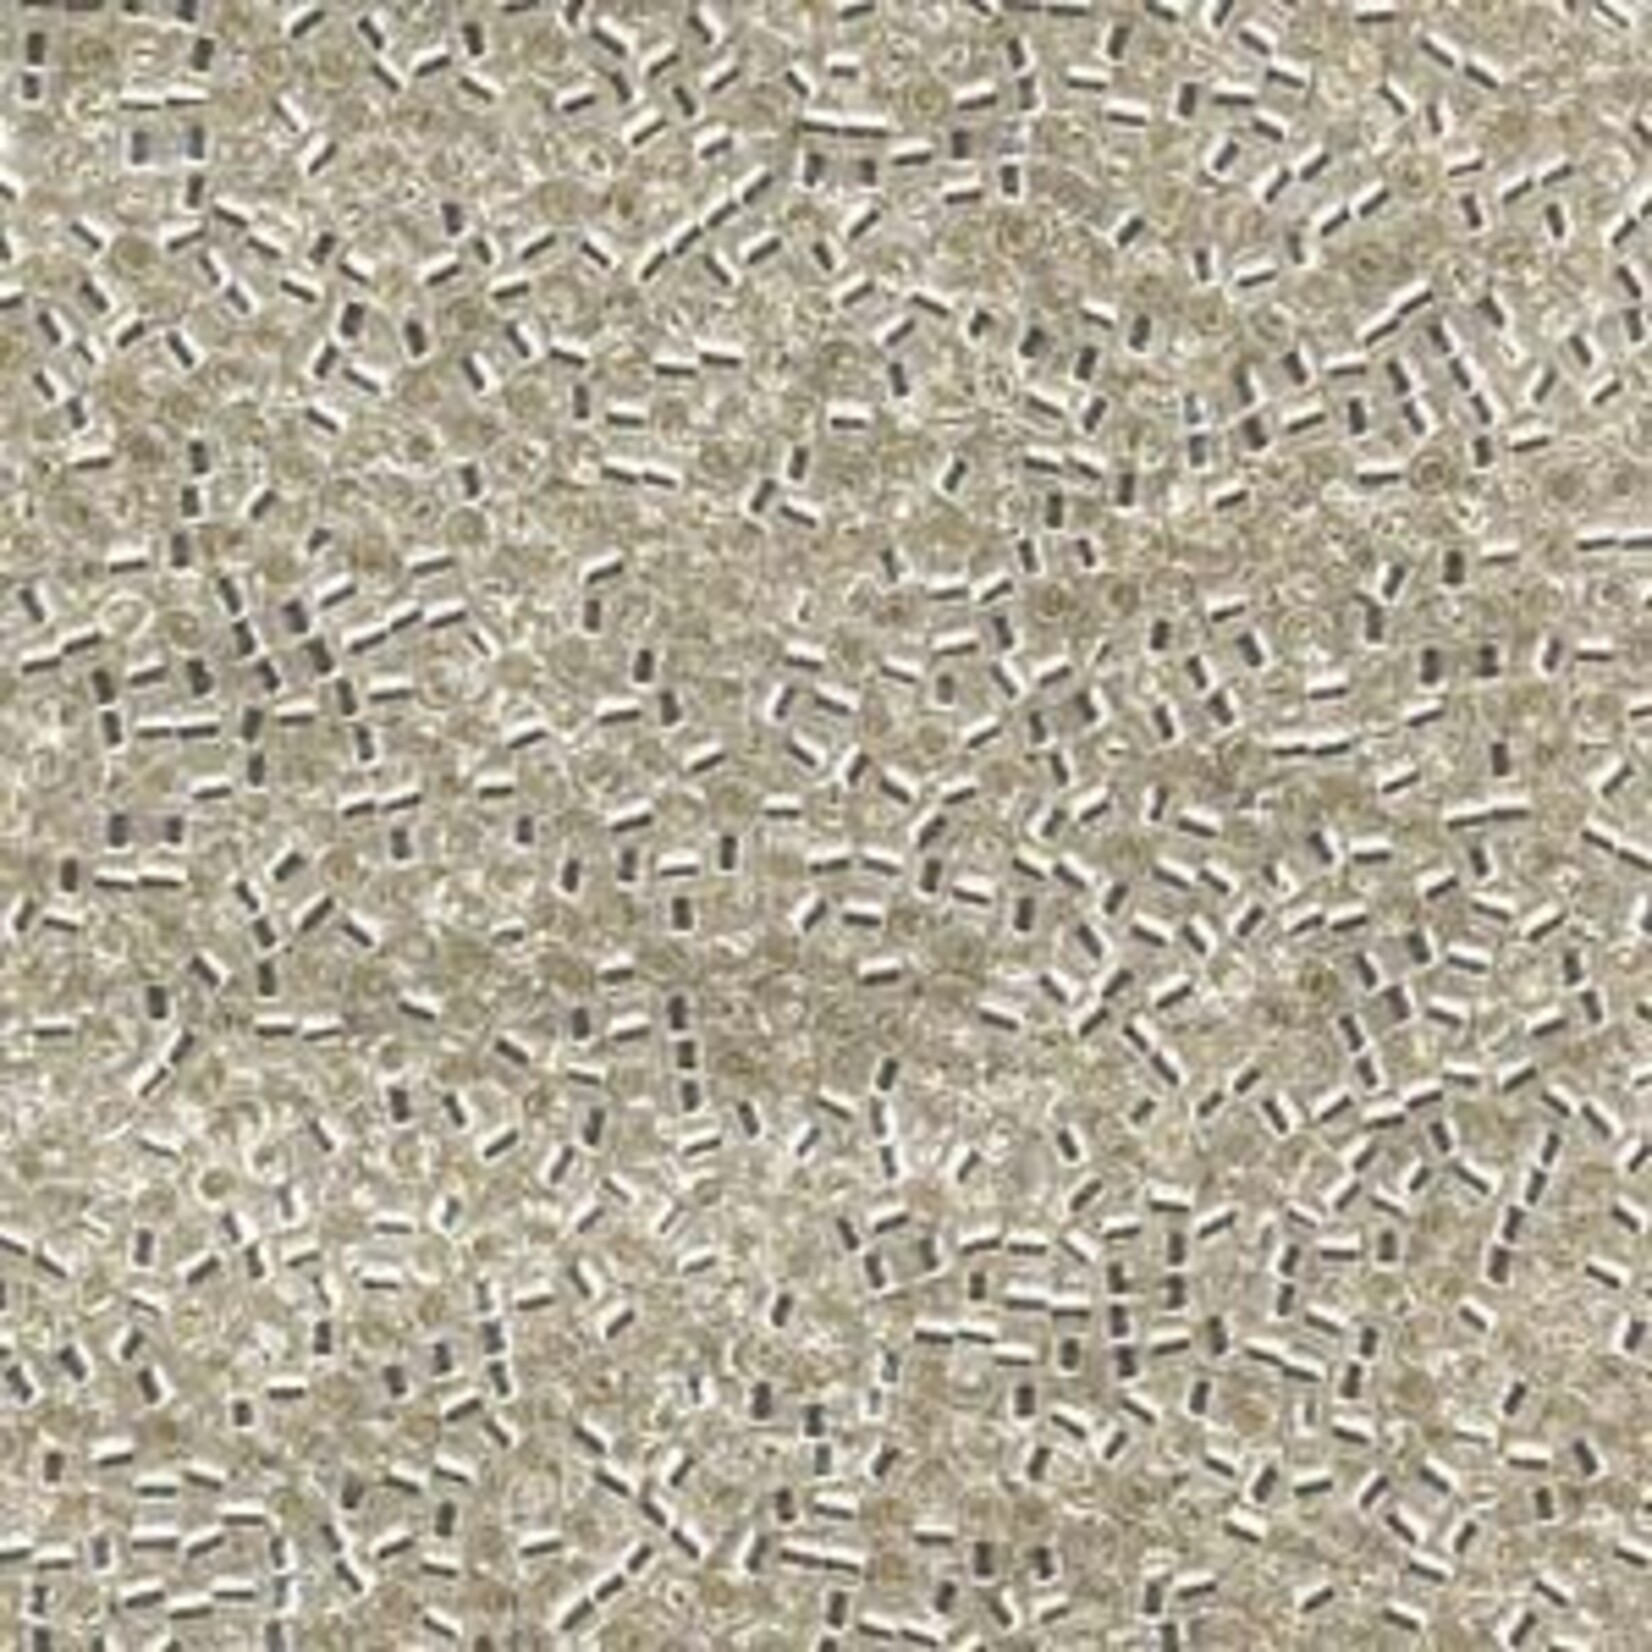 Miyuki Delica 11/0 Silver-lined Crystal Seed Beads